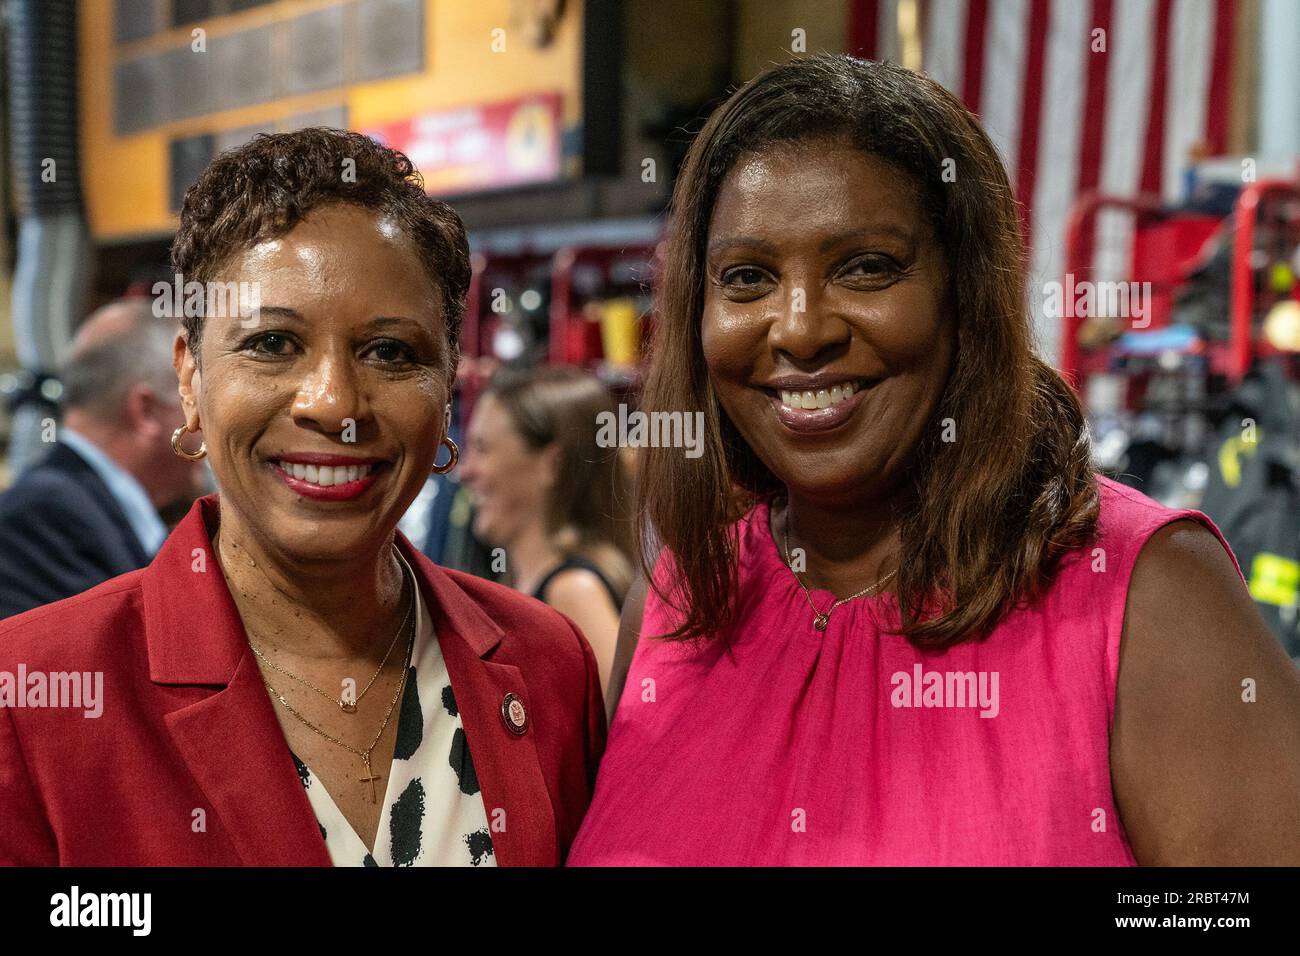 New York, USA. 10th July, 2023. City Council Speaker Adrienne Adams and State Attorney General Letitia James attend press conference on anniversary of Children's Crusade or Children's March as it is known at FDNY Engine 1, Ladder 24 station in New York. March was held in Birmingham, Alabama on 2 - 10 May, 1963 and was attended by more than 5,000 school children, 3 of them joined this press conference: Gloria Washington, Gwendolyn Gamble, Gwyndolyn Webb. Members of FDNY at the time stood up against the City of Birmingham fire department using force against children. (Photo by Lev Radin/Pacific  Stock Photo